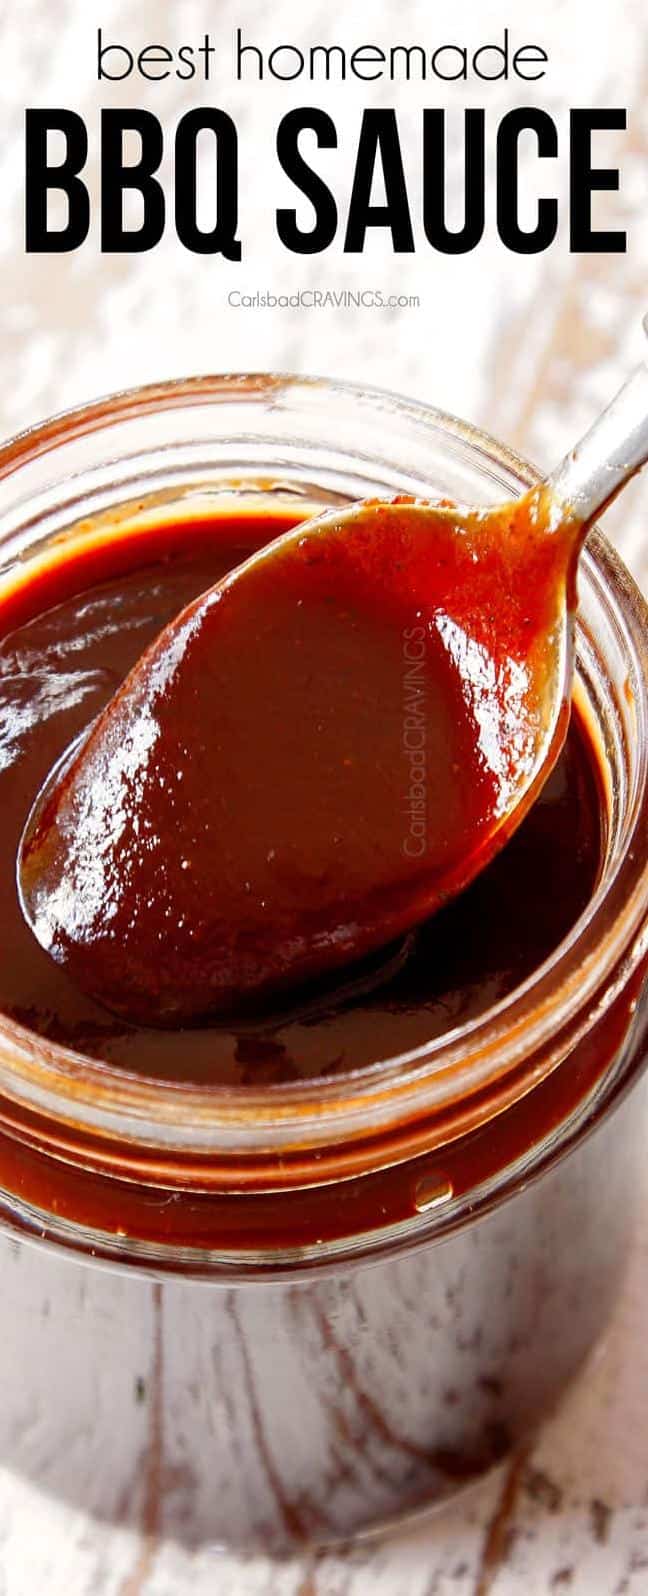  Dipping crispy French fries into a side of tangy Sugar Shack Barbecue Sauce